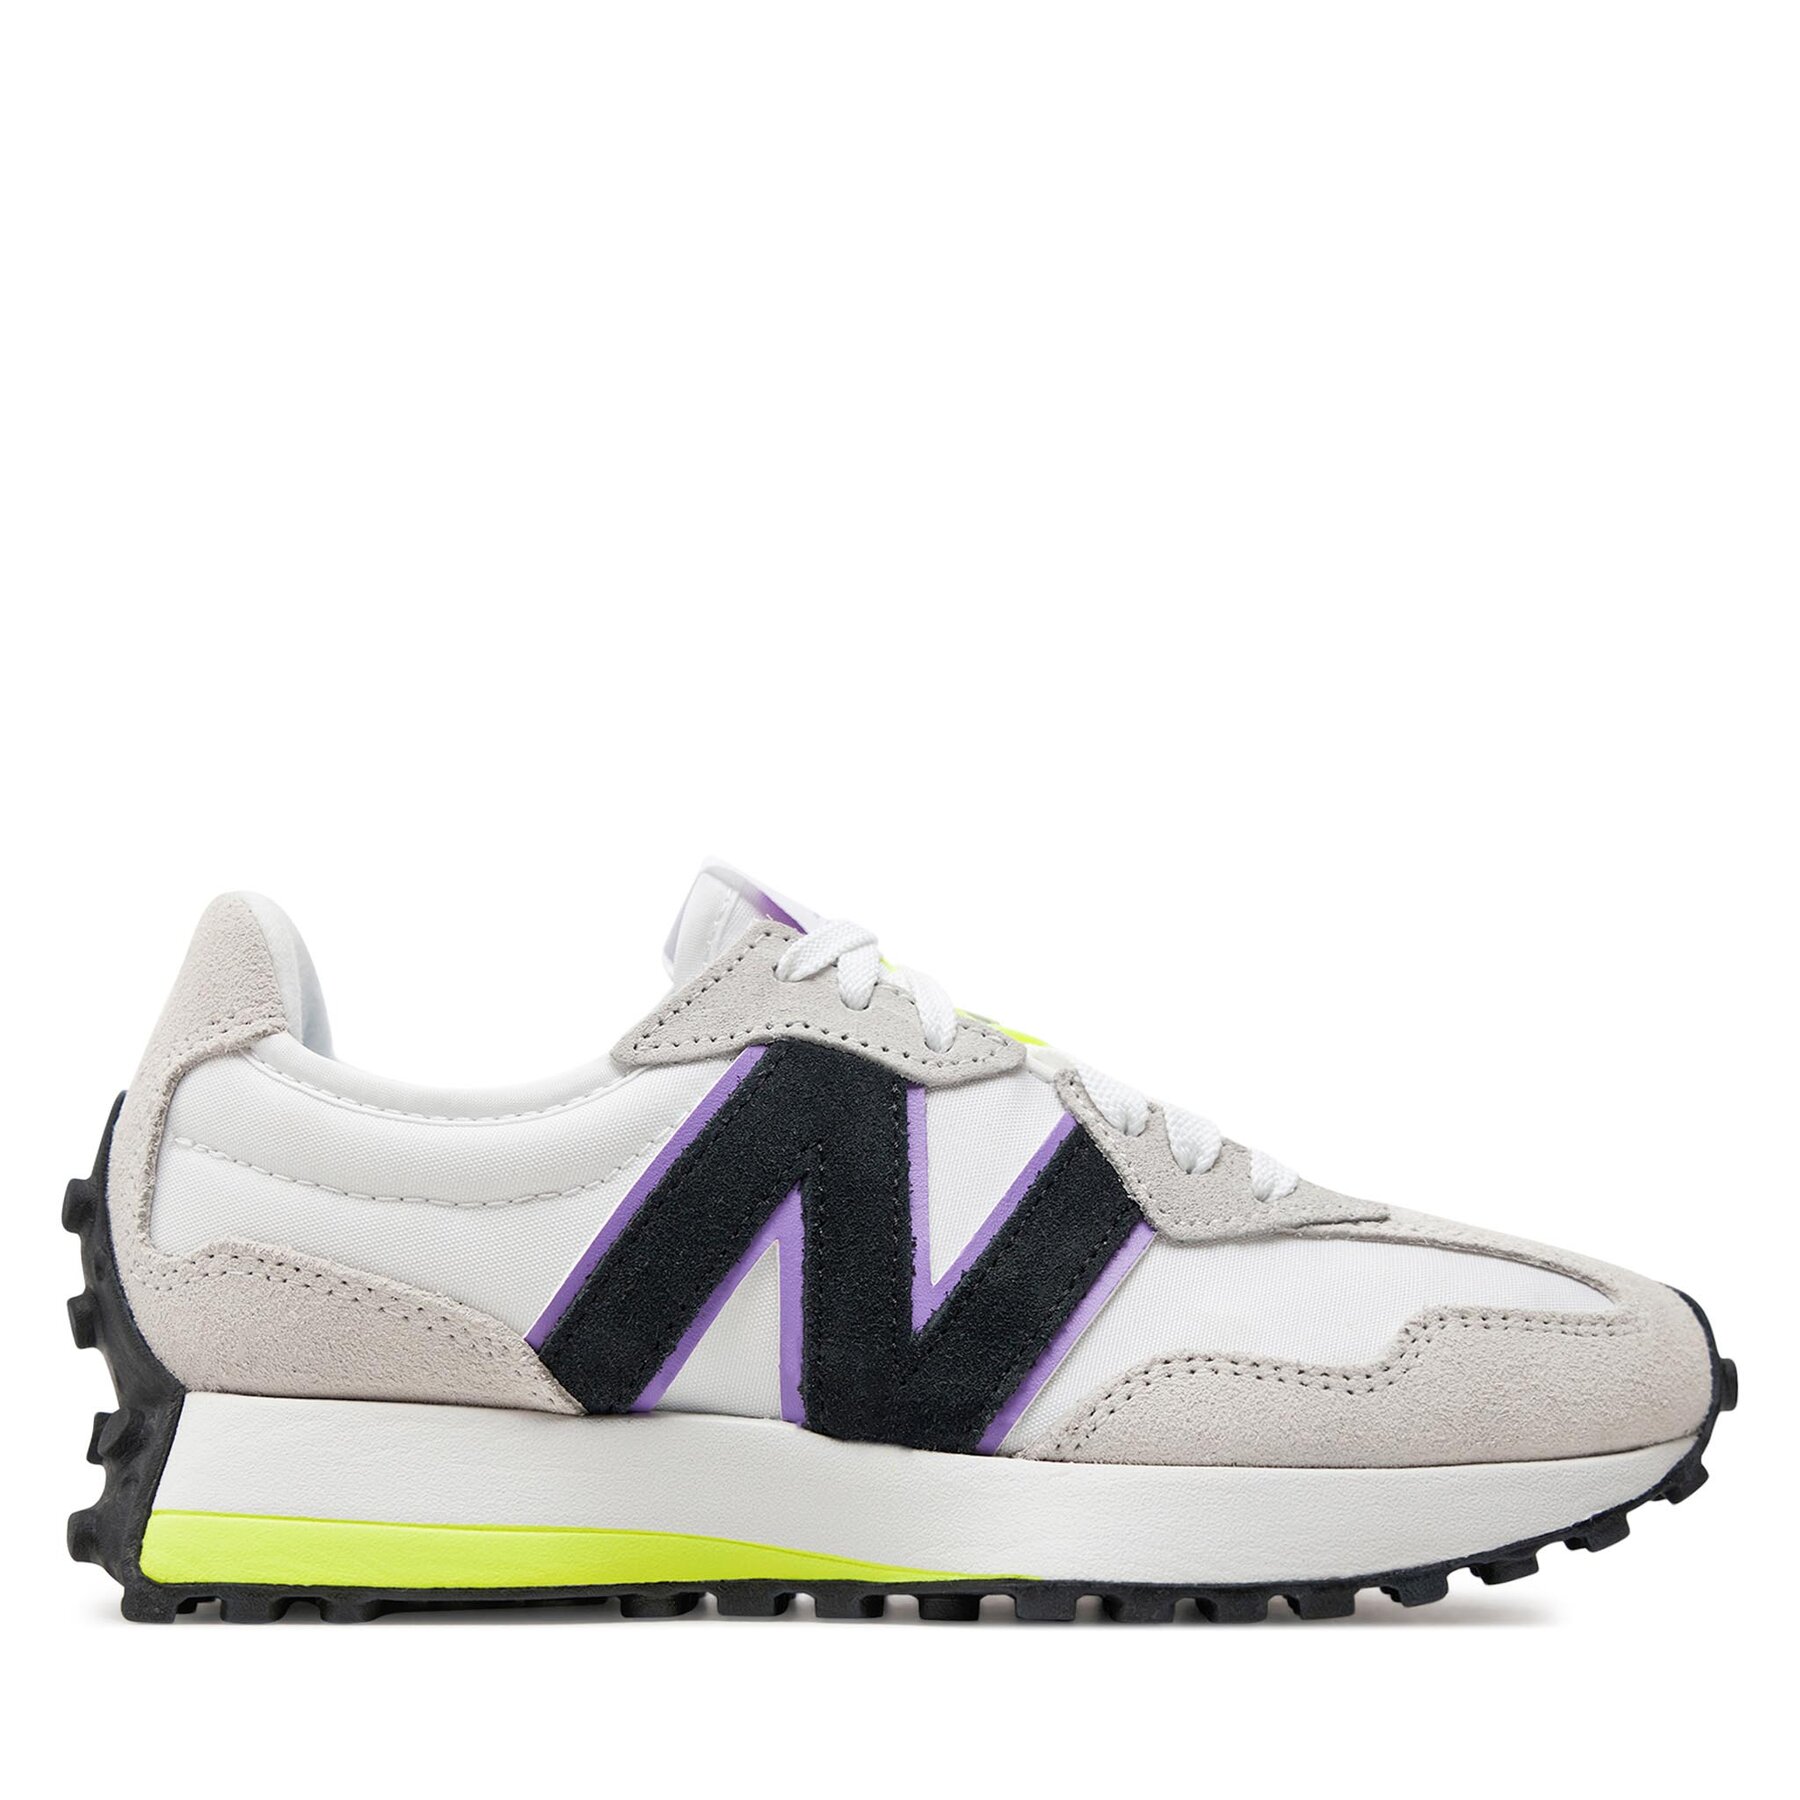 New Balance 327 Women clear yellow - Sneakers